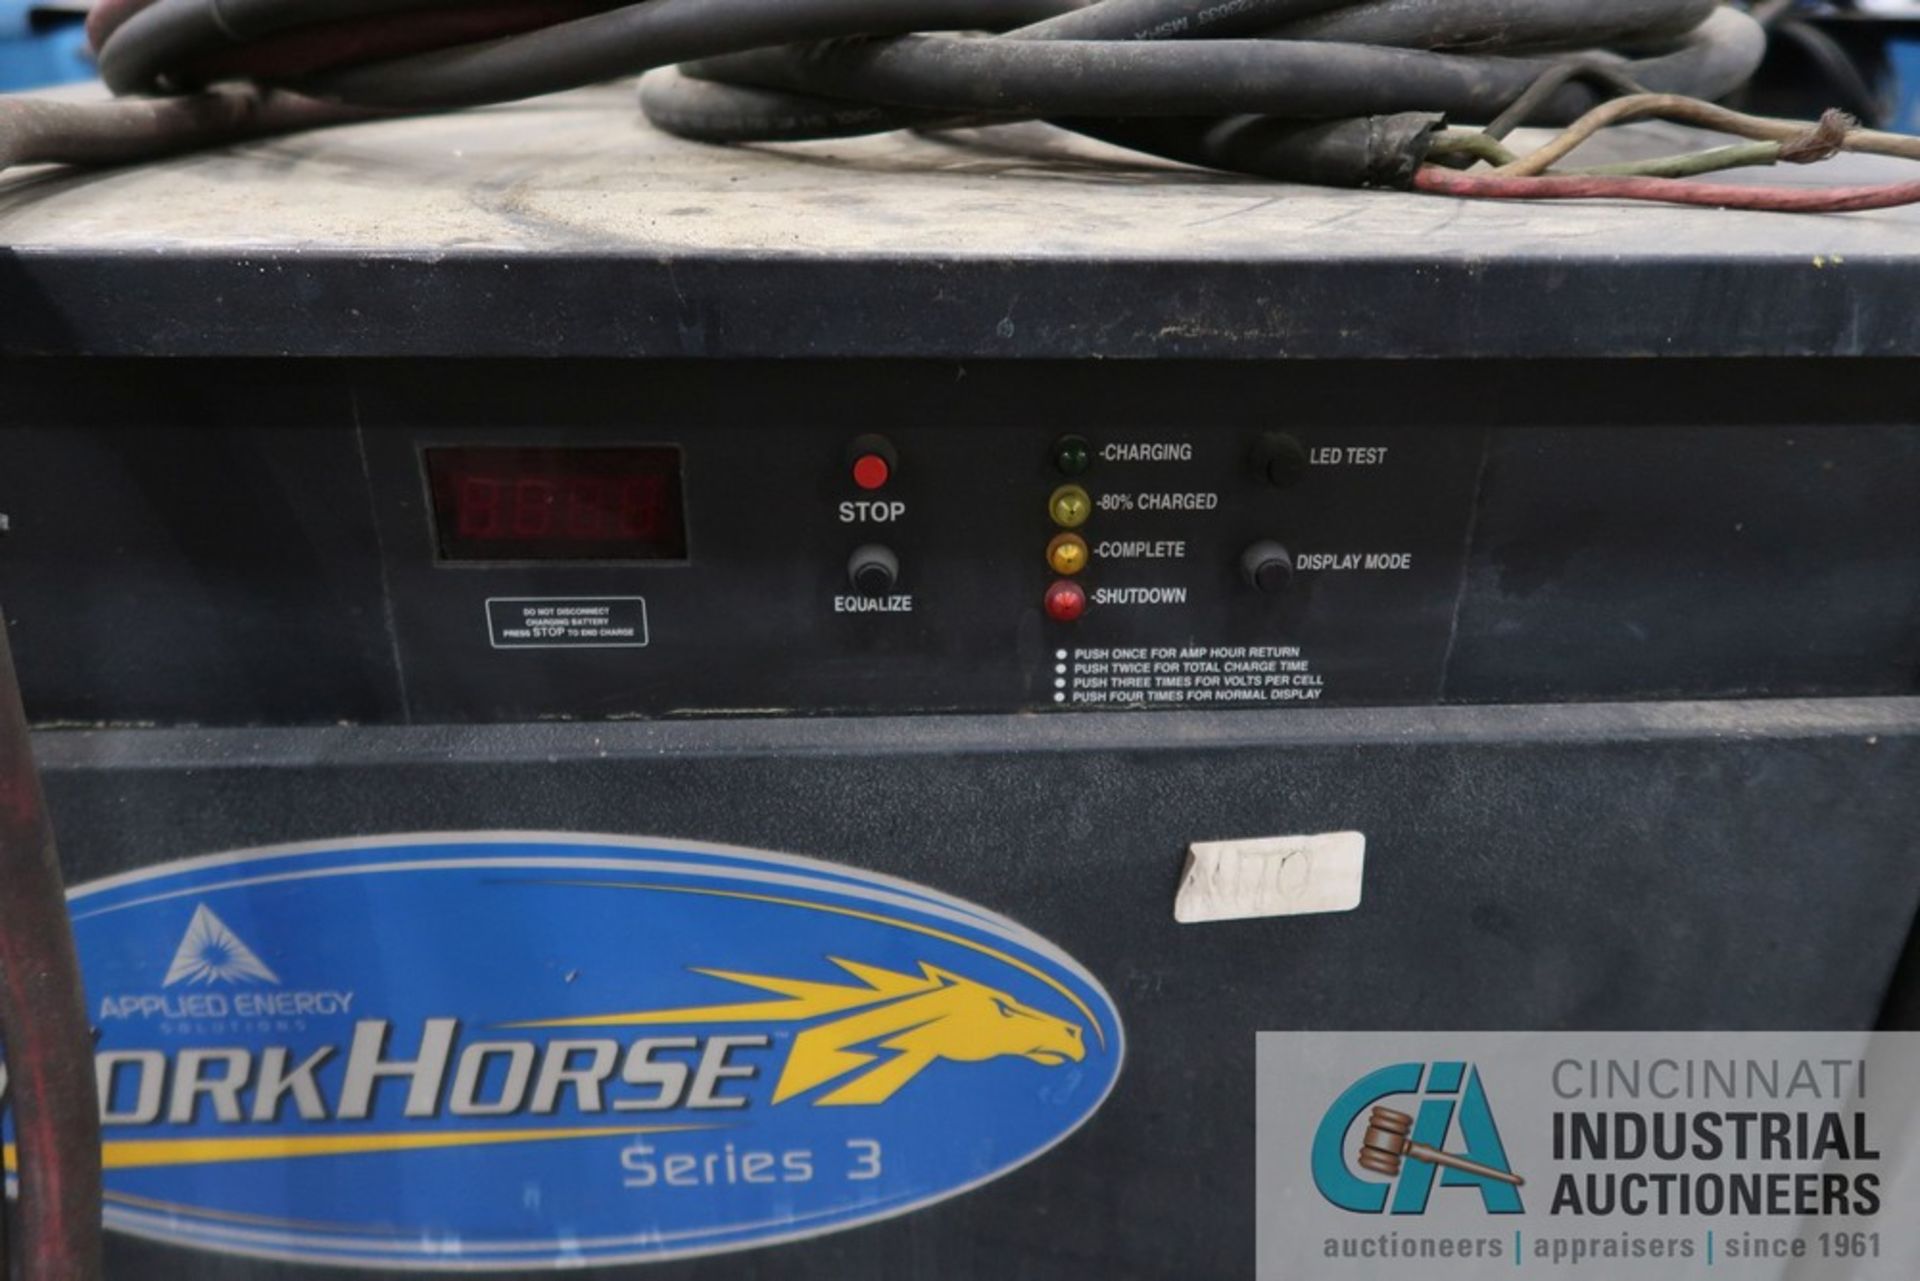 24 VOLT APPLIED ENERGY WORKHORSE SERIES 3 BATTERY CHARGER - Image 2 of 3